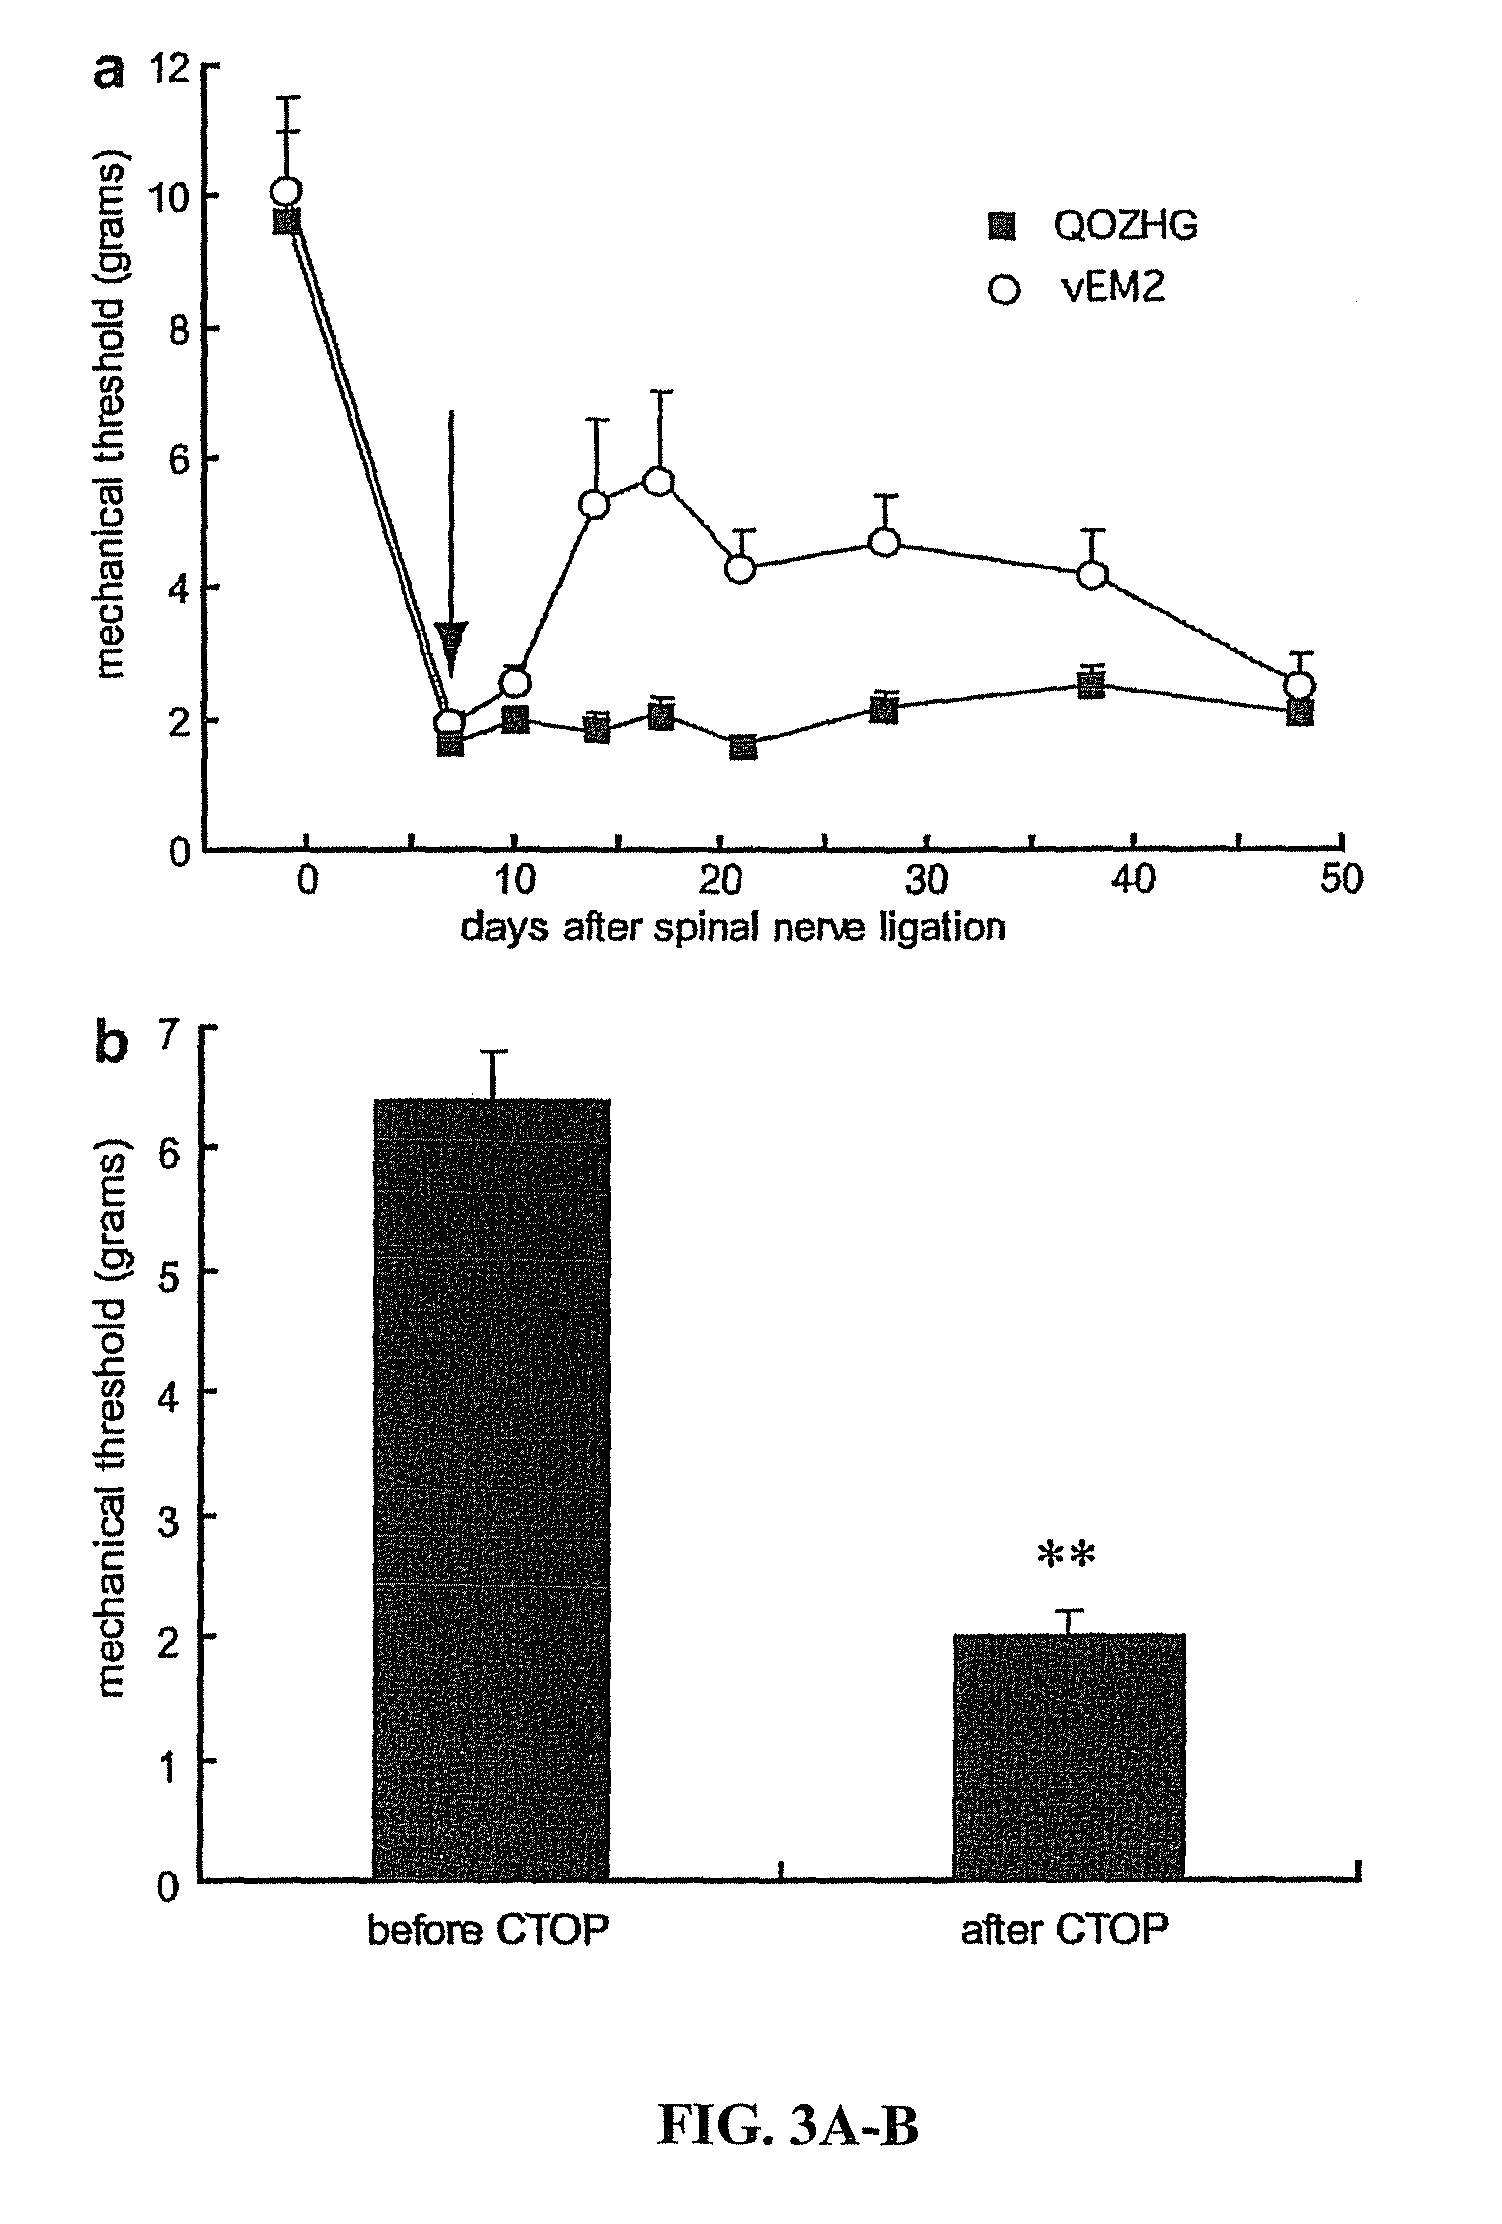 Method of amidated peptide biosynthesis and delivery in vivo: endomorphin-2 for pain therapy